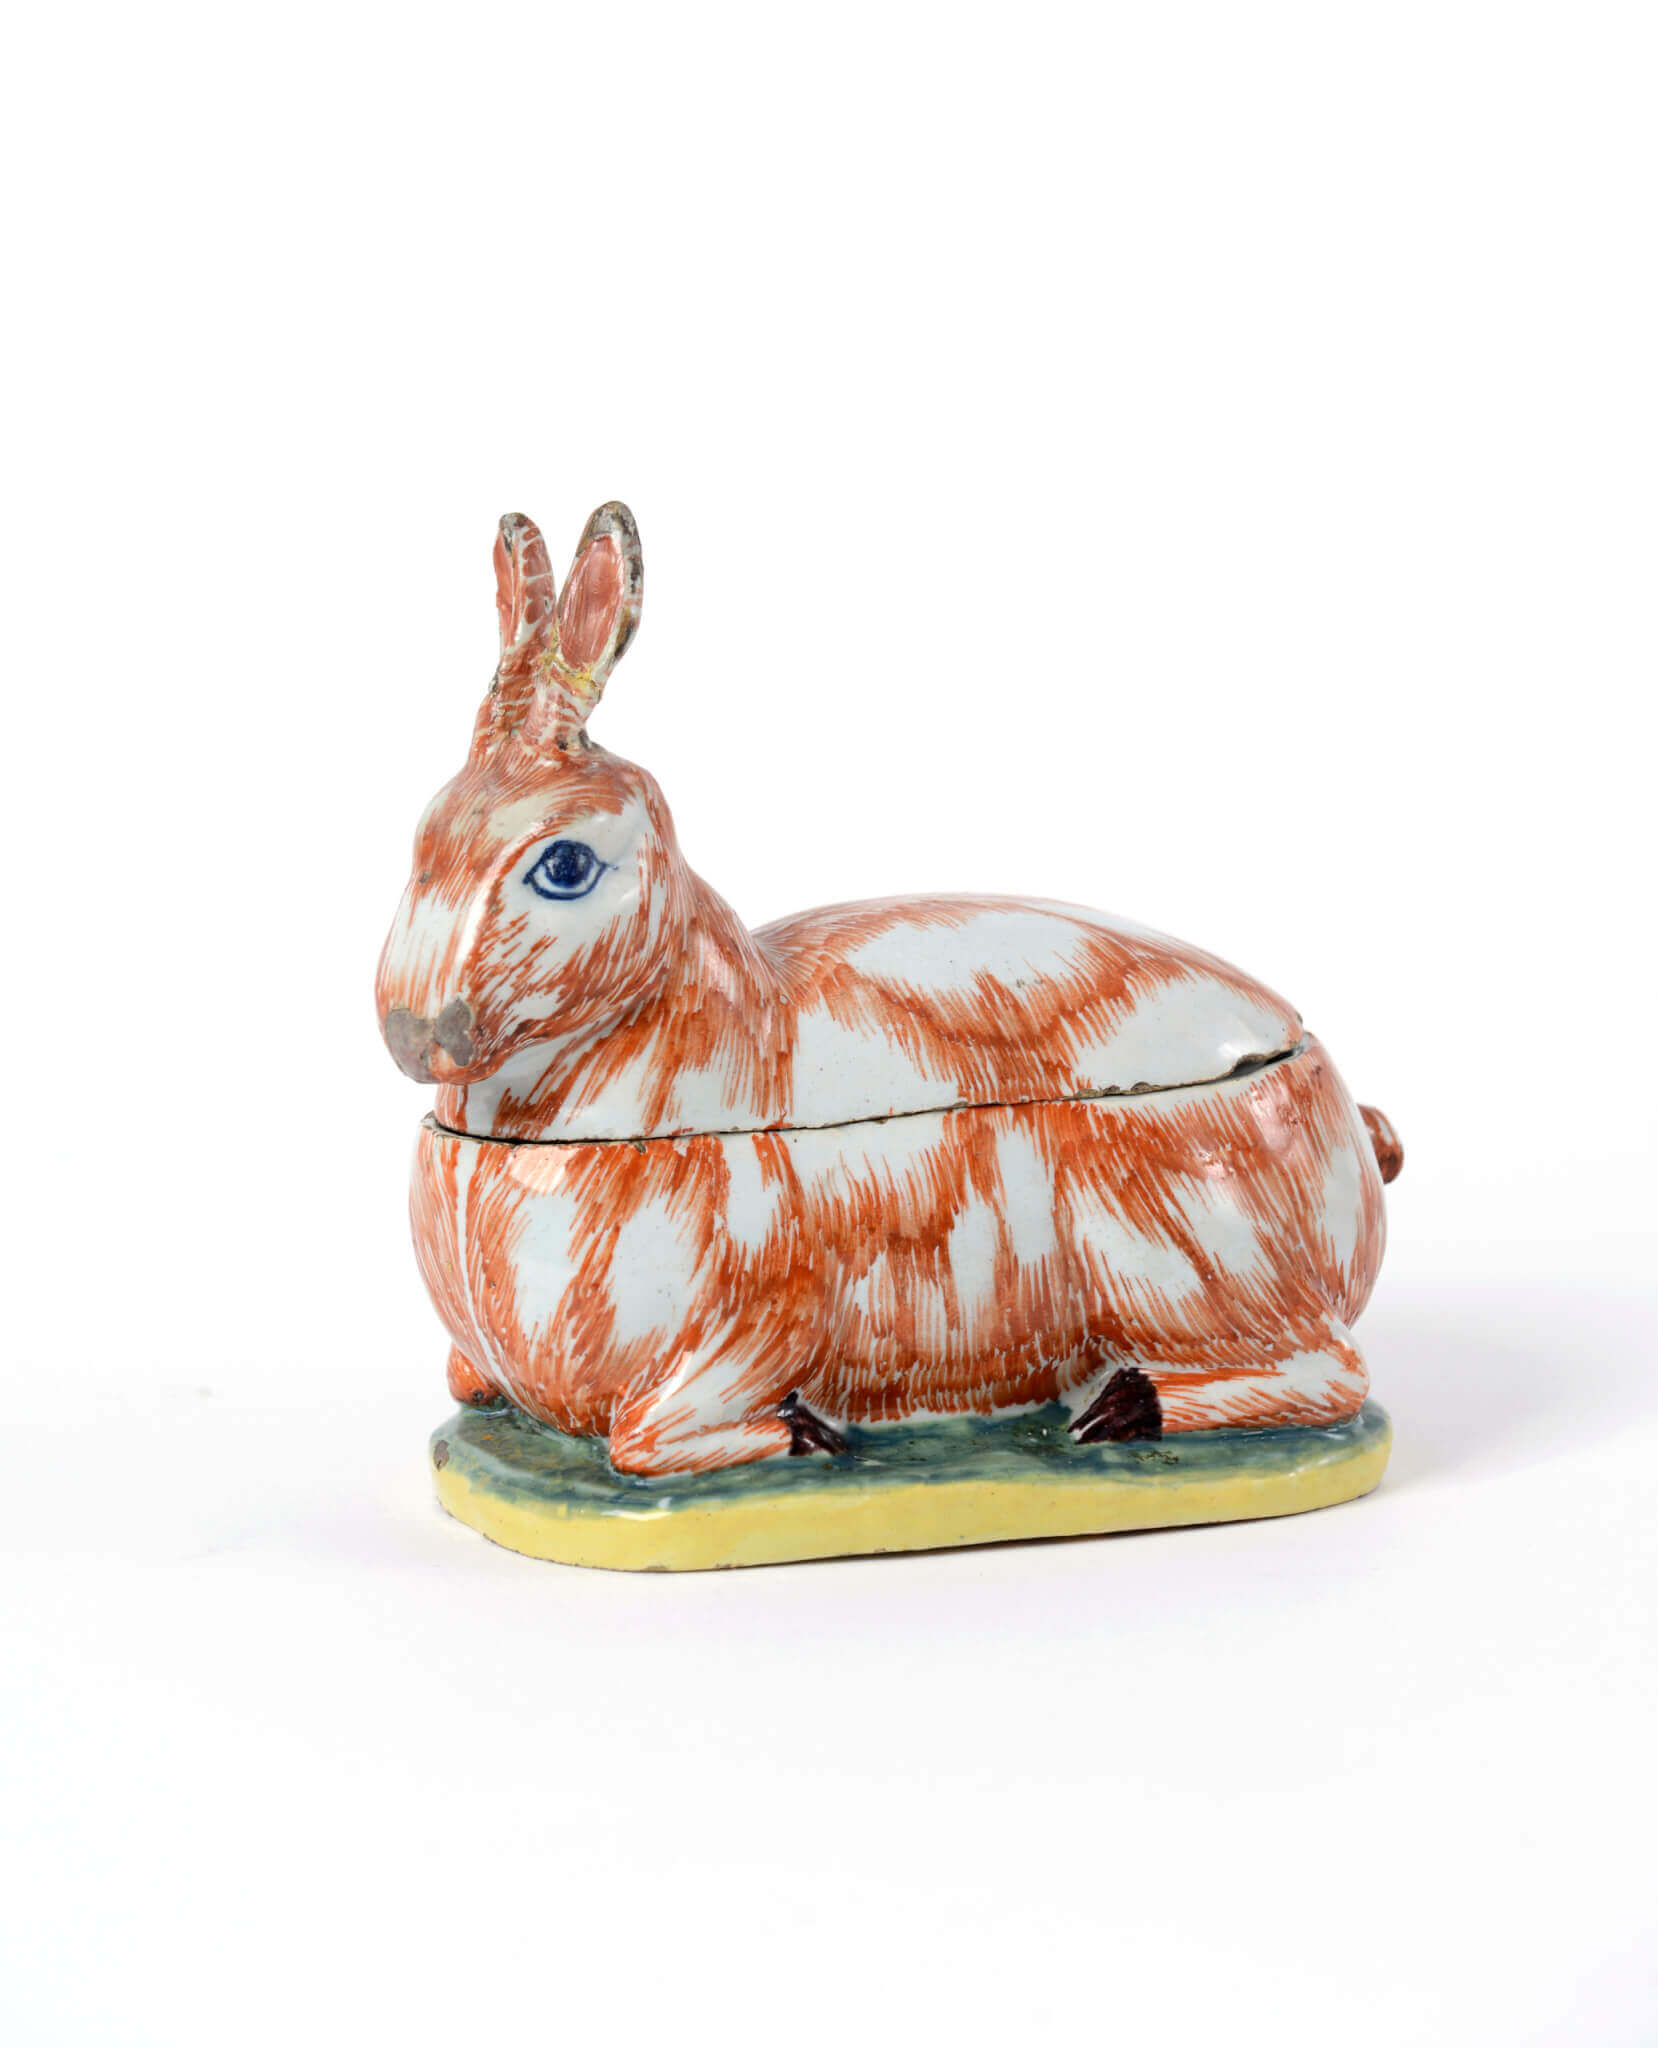 Polychrome Delftware hare tureen